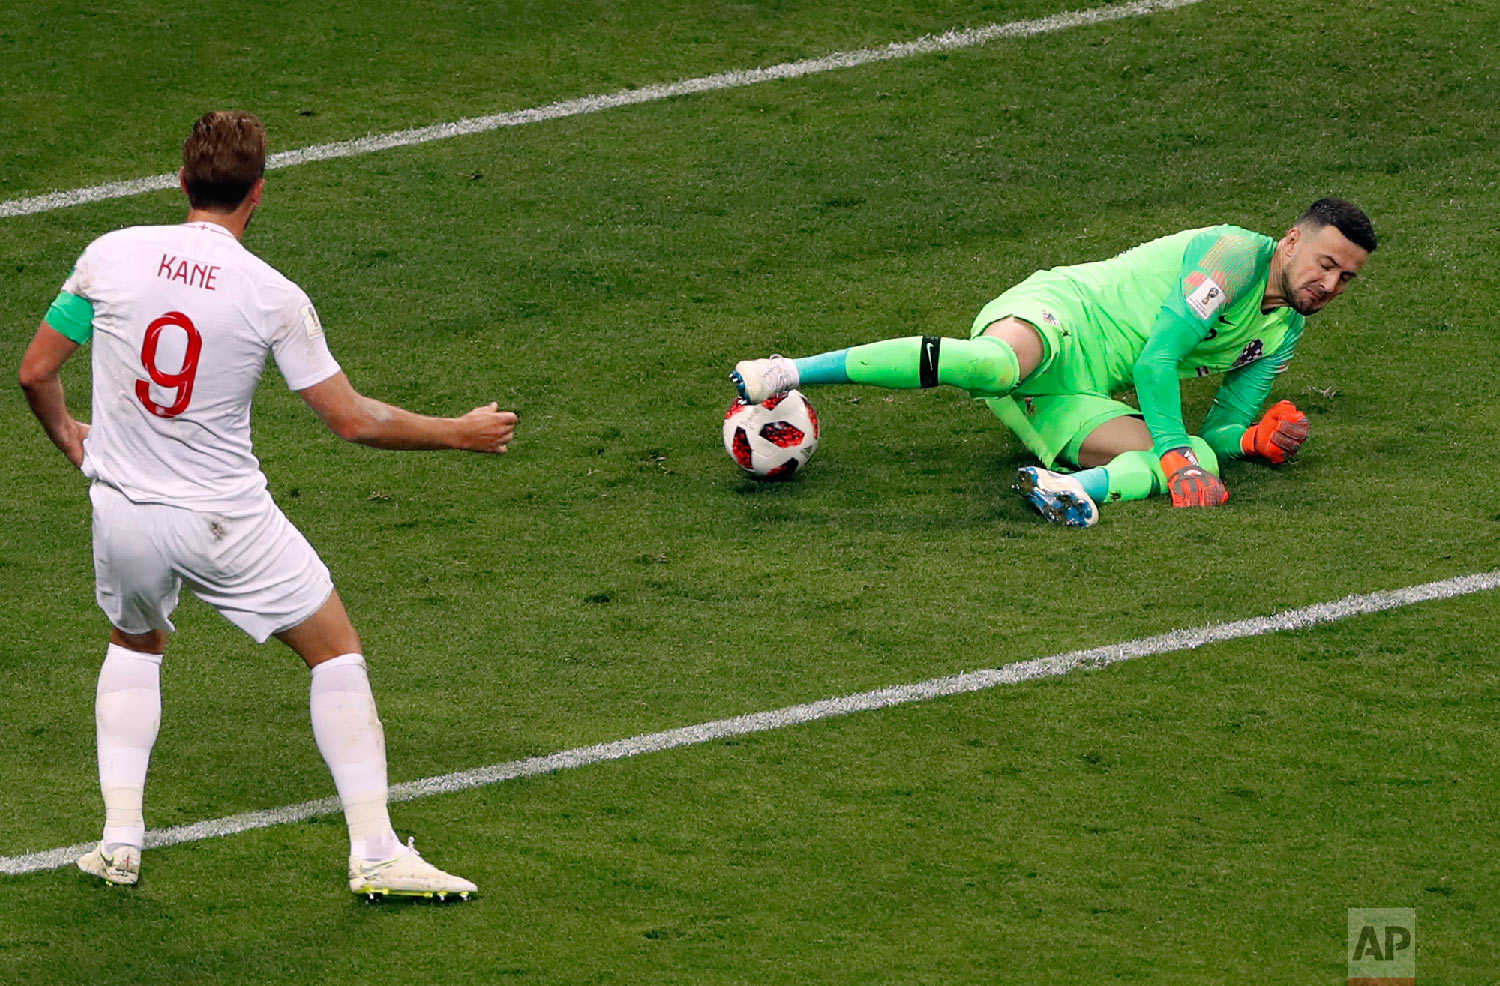  Croatia goalkeeper Danijel Subasic, right, makes a save in front of England's Harry Kane during the semifinal match between Croatia and England at the 2018 soccer World Cup in the Luzhniki Stadium in Moscow, Russia, Wednesday, July 11, 2018. (AP Pho